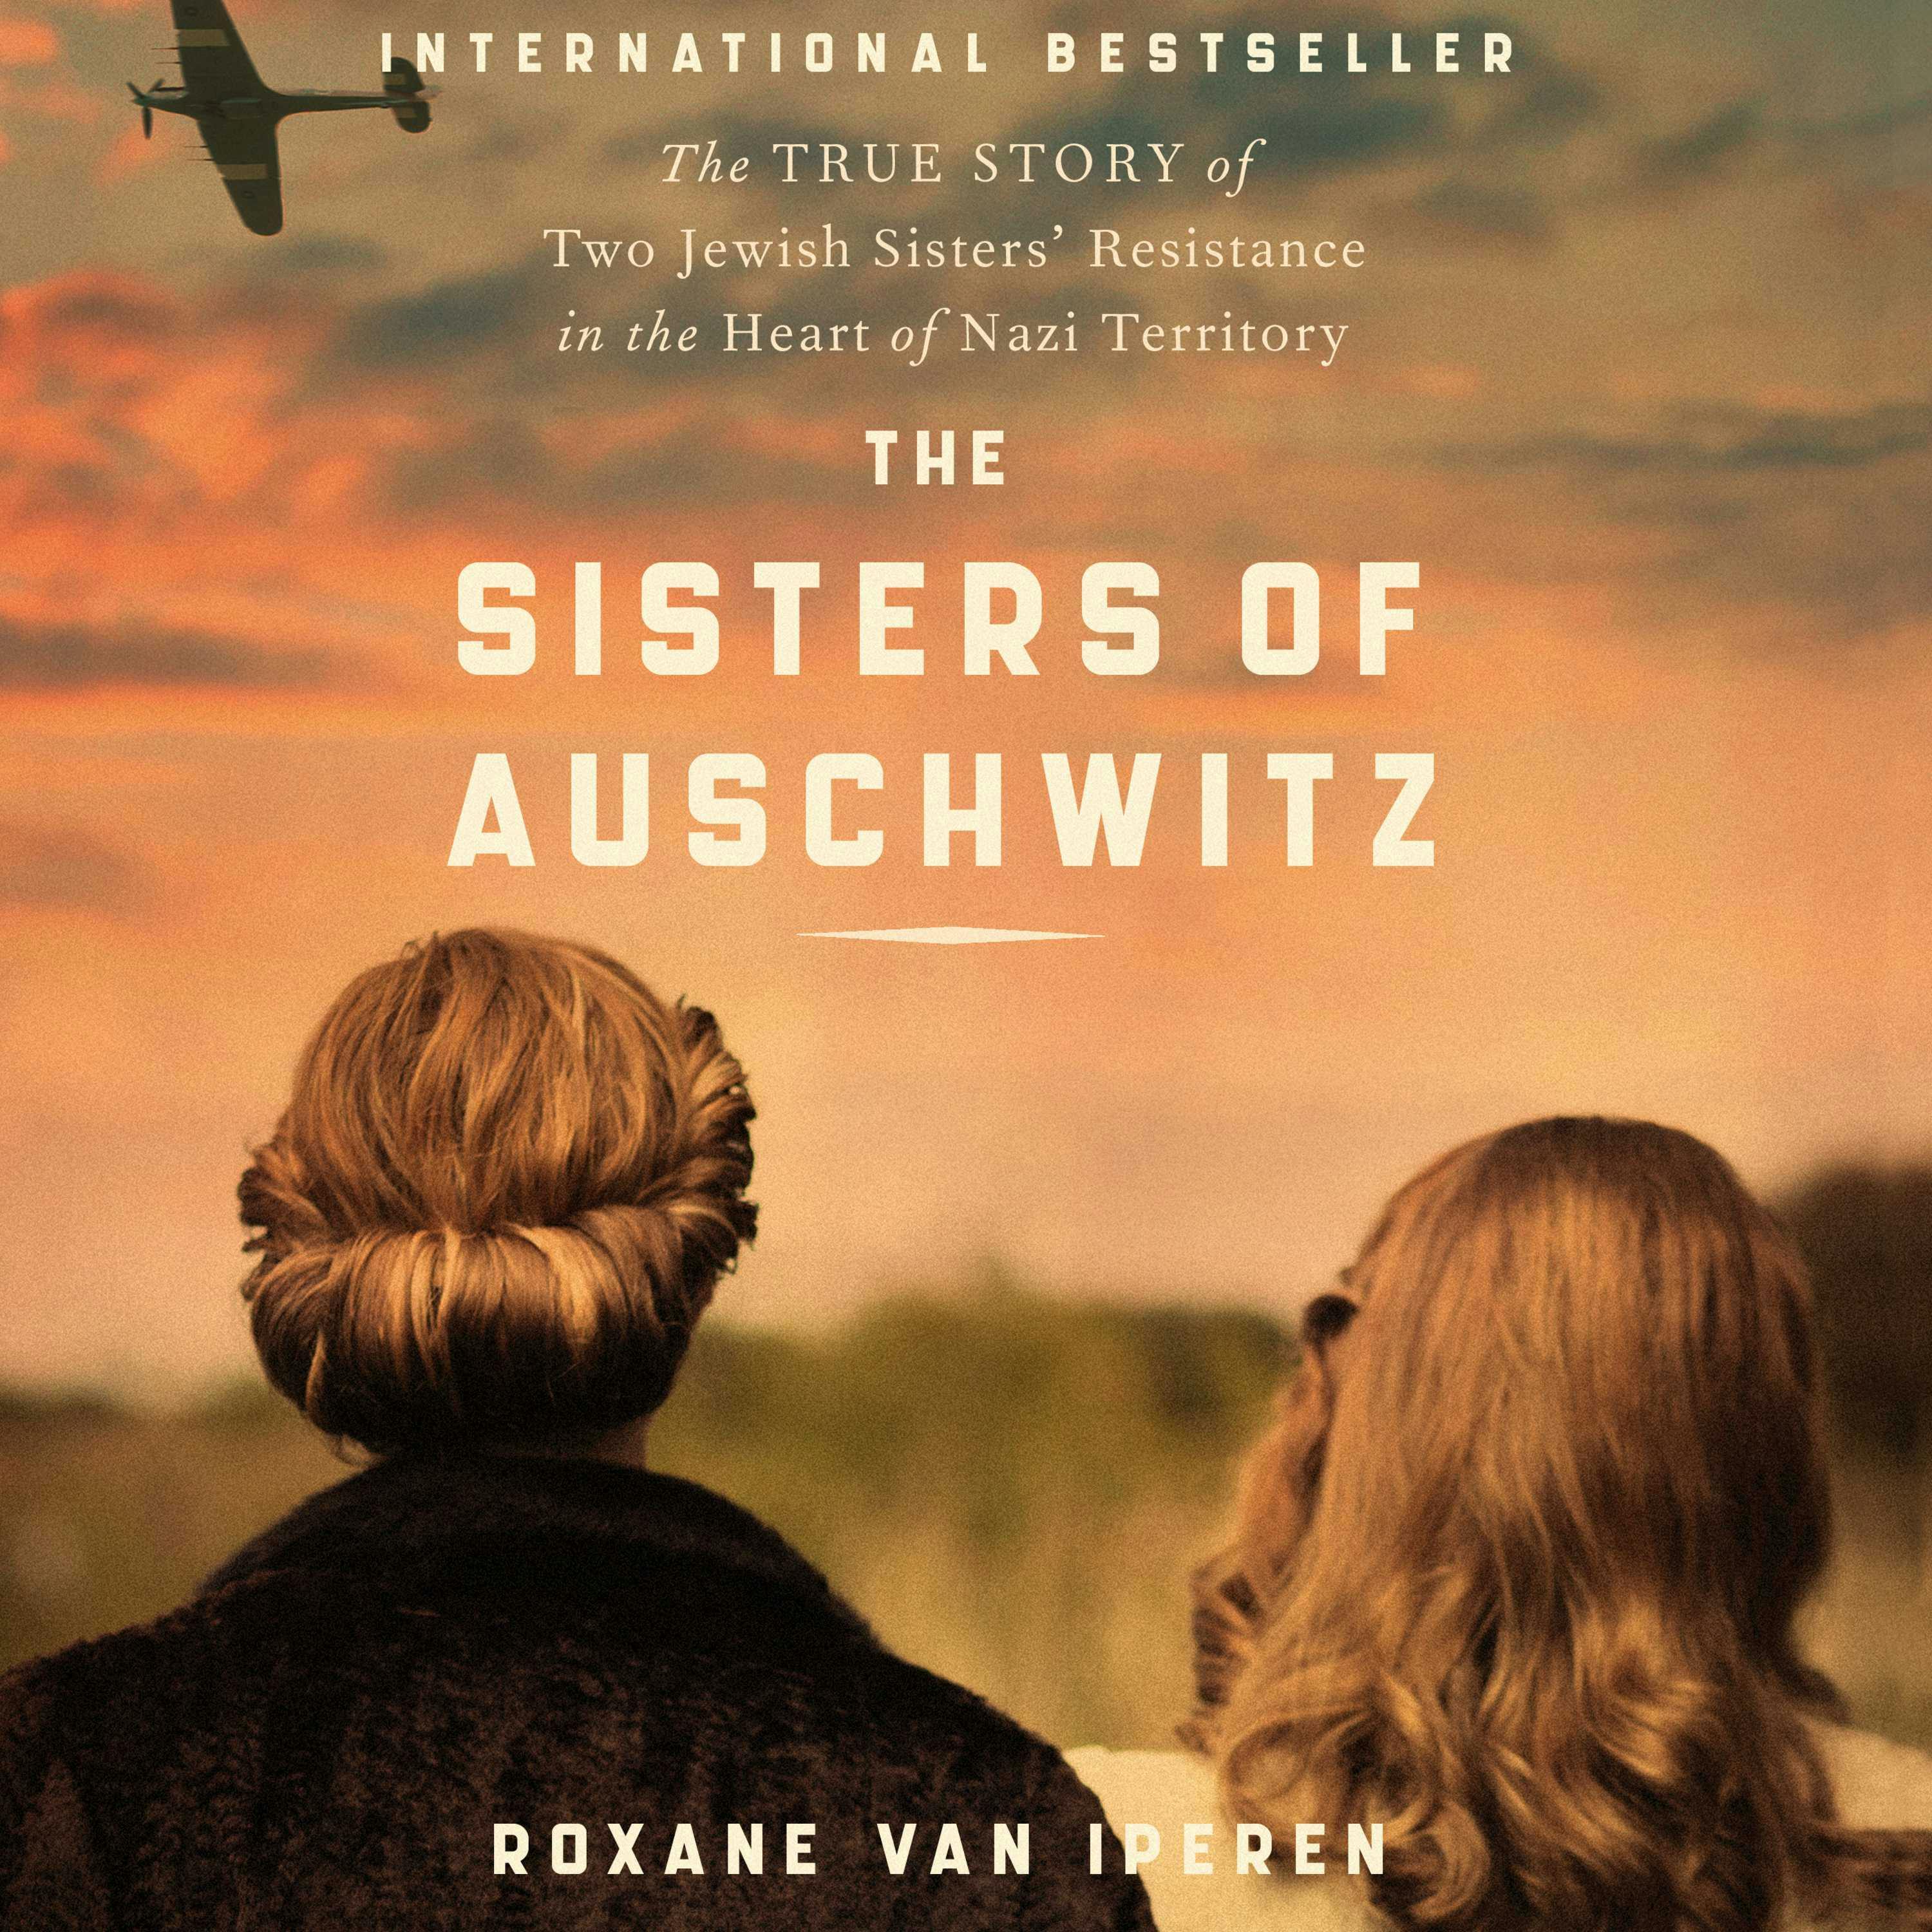 The Sisters of Auschwitz: The True Story of Two Jewish Sisters’ Resistance in the Heart of Nazi Territory - Roxane van Iperen